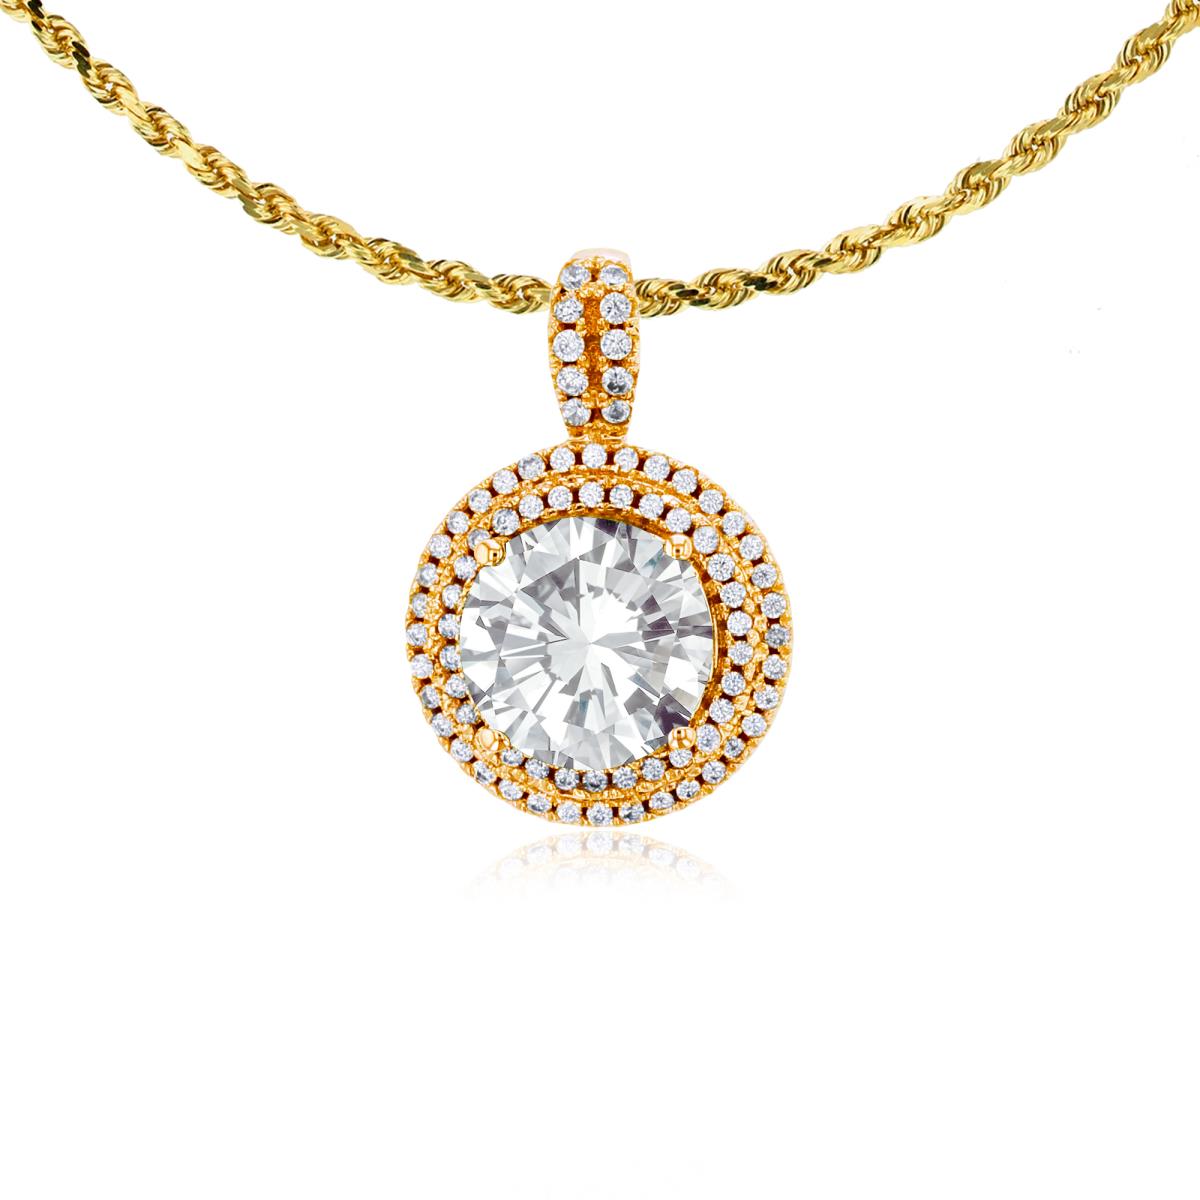 10K Yellow Gold 7mm Round White Topaz & 0.25 CTTW Diamonds Double Halo 18" Rope Chain Necklace